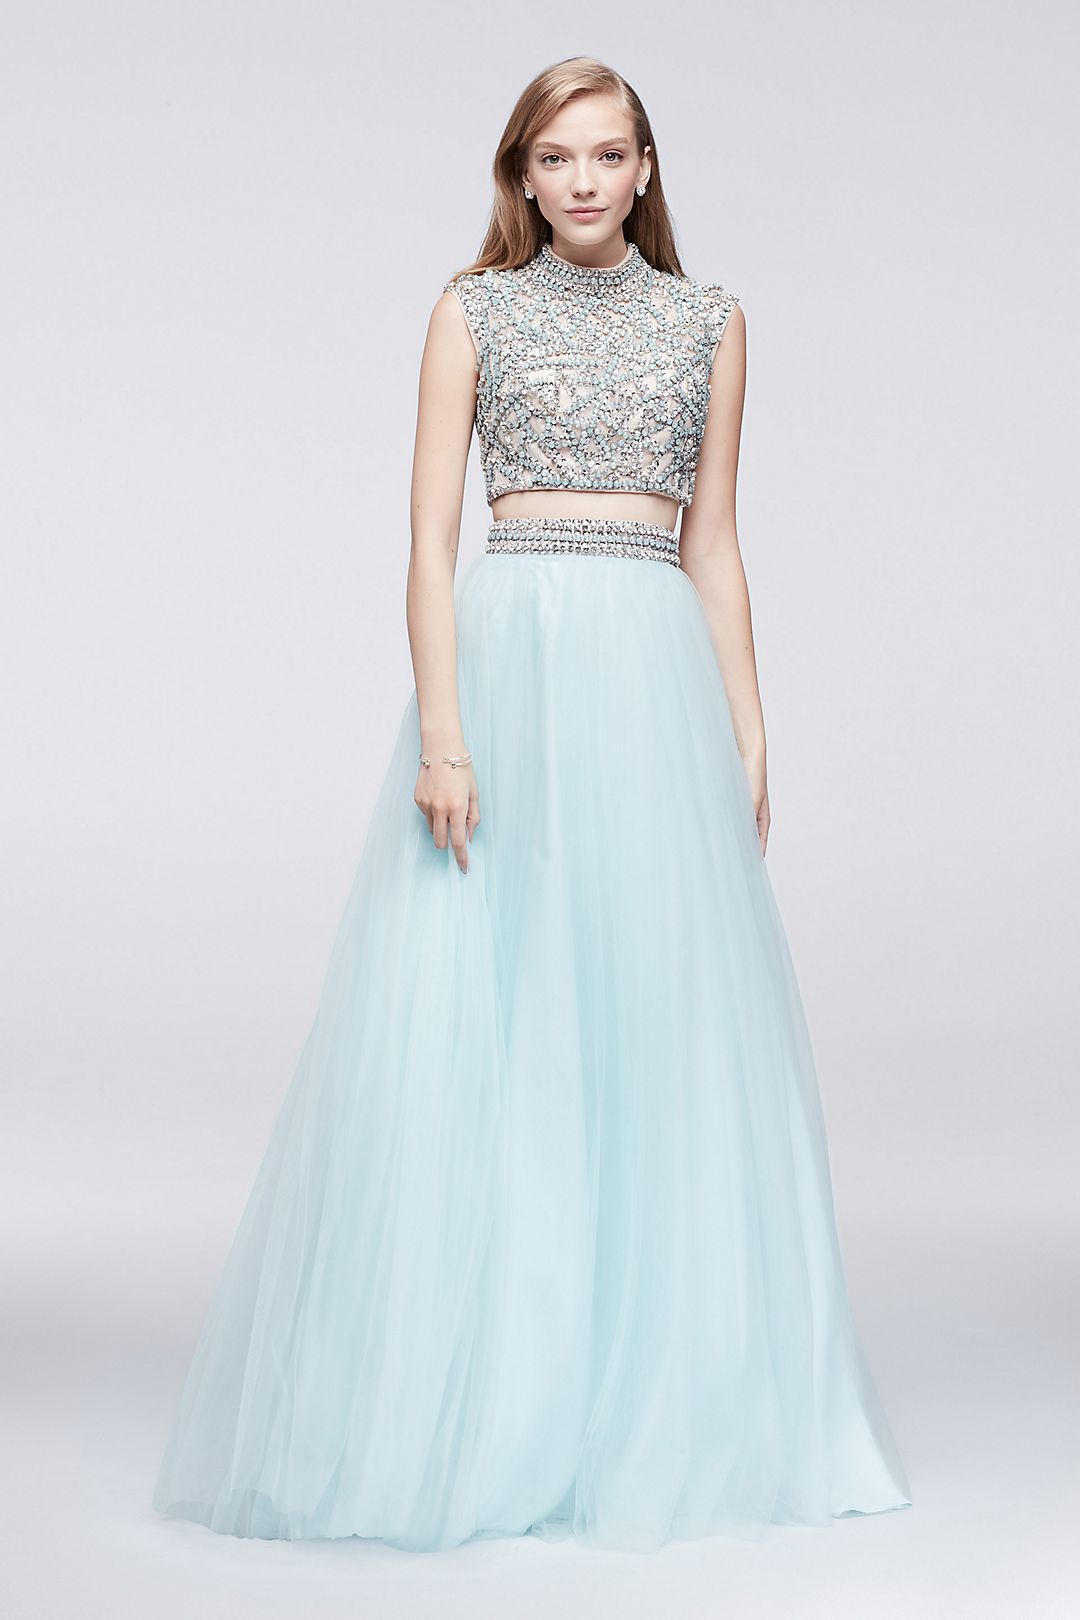 Jeweled High-Neck Top and Tulle Skirt Set Image 1